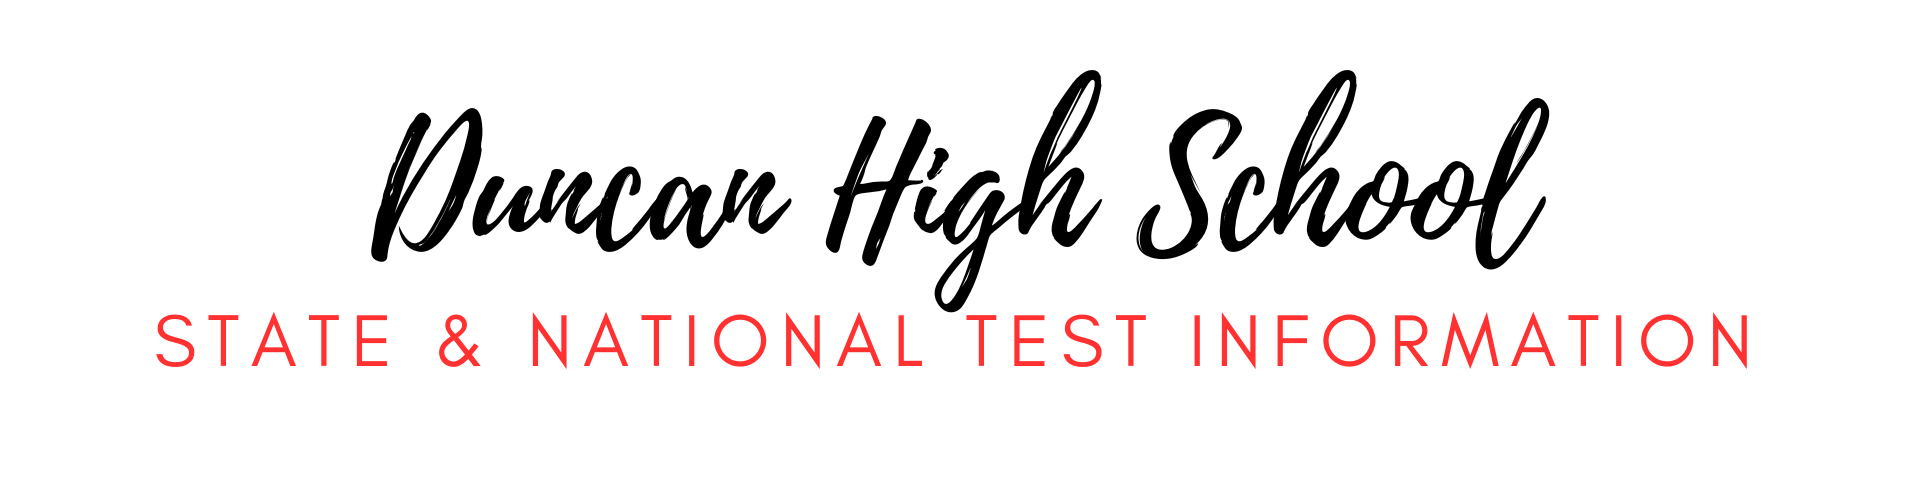 State & National Test